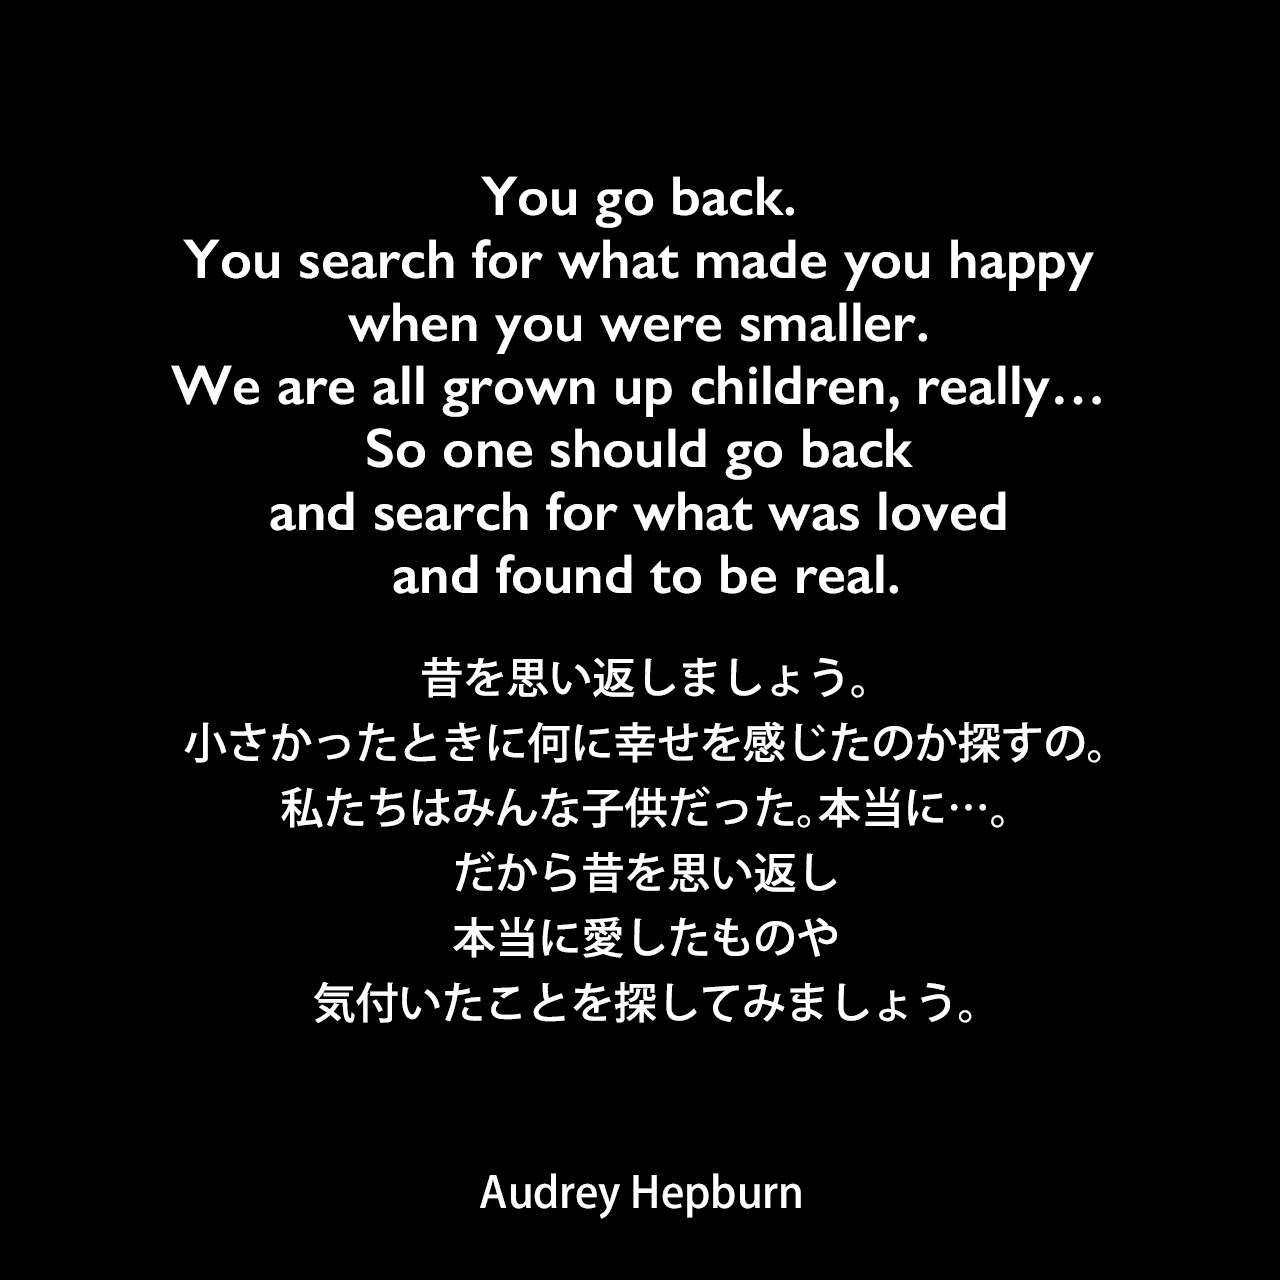 You go back. You search for what made you happy when you were smaller. We are all grown up children, really… So one should go back and search for what was loved and found to be real.昔を思い返しましょう。小さかったときに何に幸せを感じたのか探すの。私たちはみんな子供だった。本当に…。だから昔を思い返し、本当に愛したものや気付いたことを探してみましょう。Audrey Hepburn